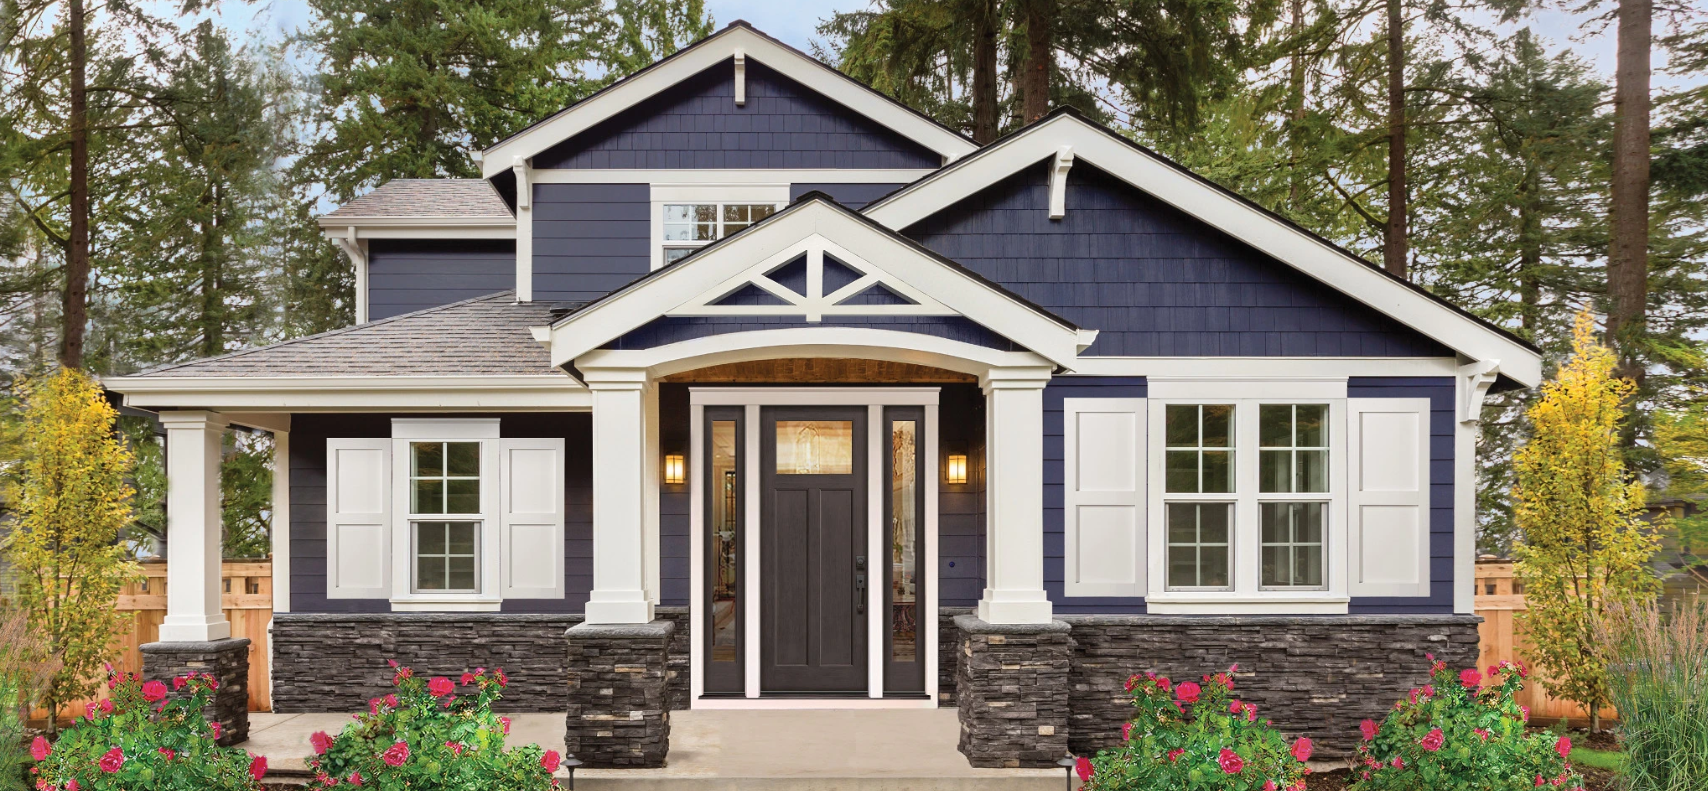 Millwork and Trim That Adds Serious Curb Appeal